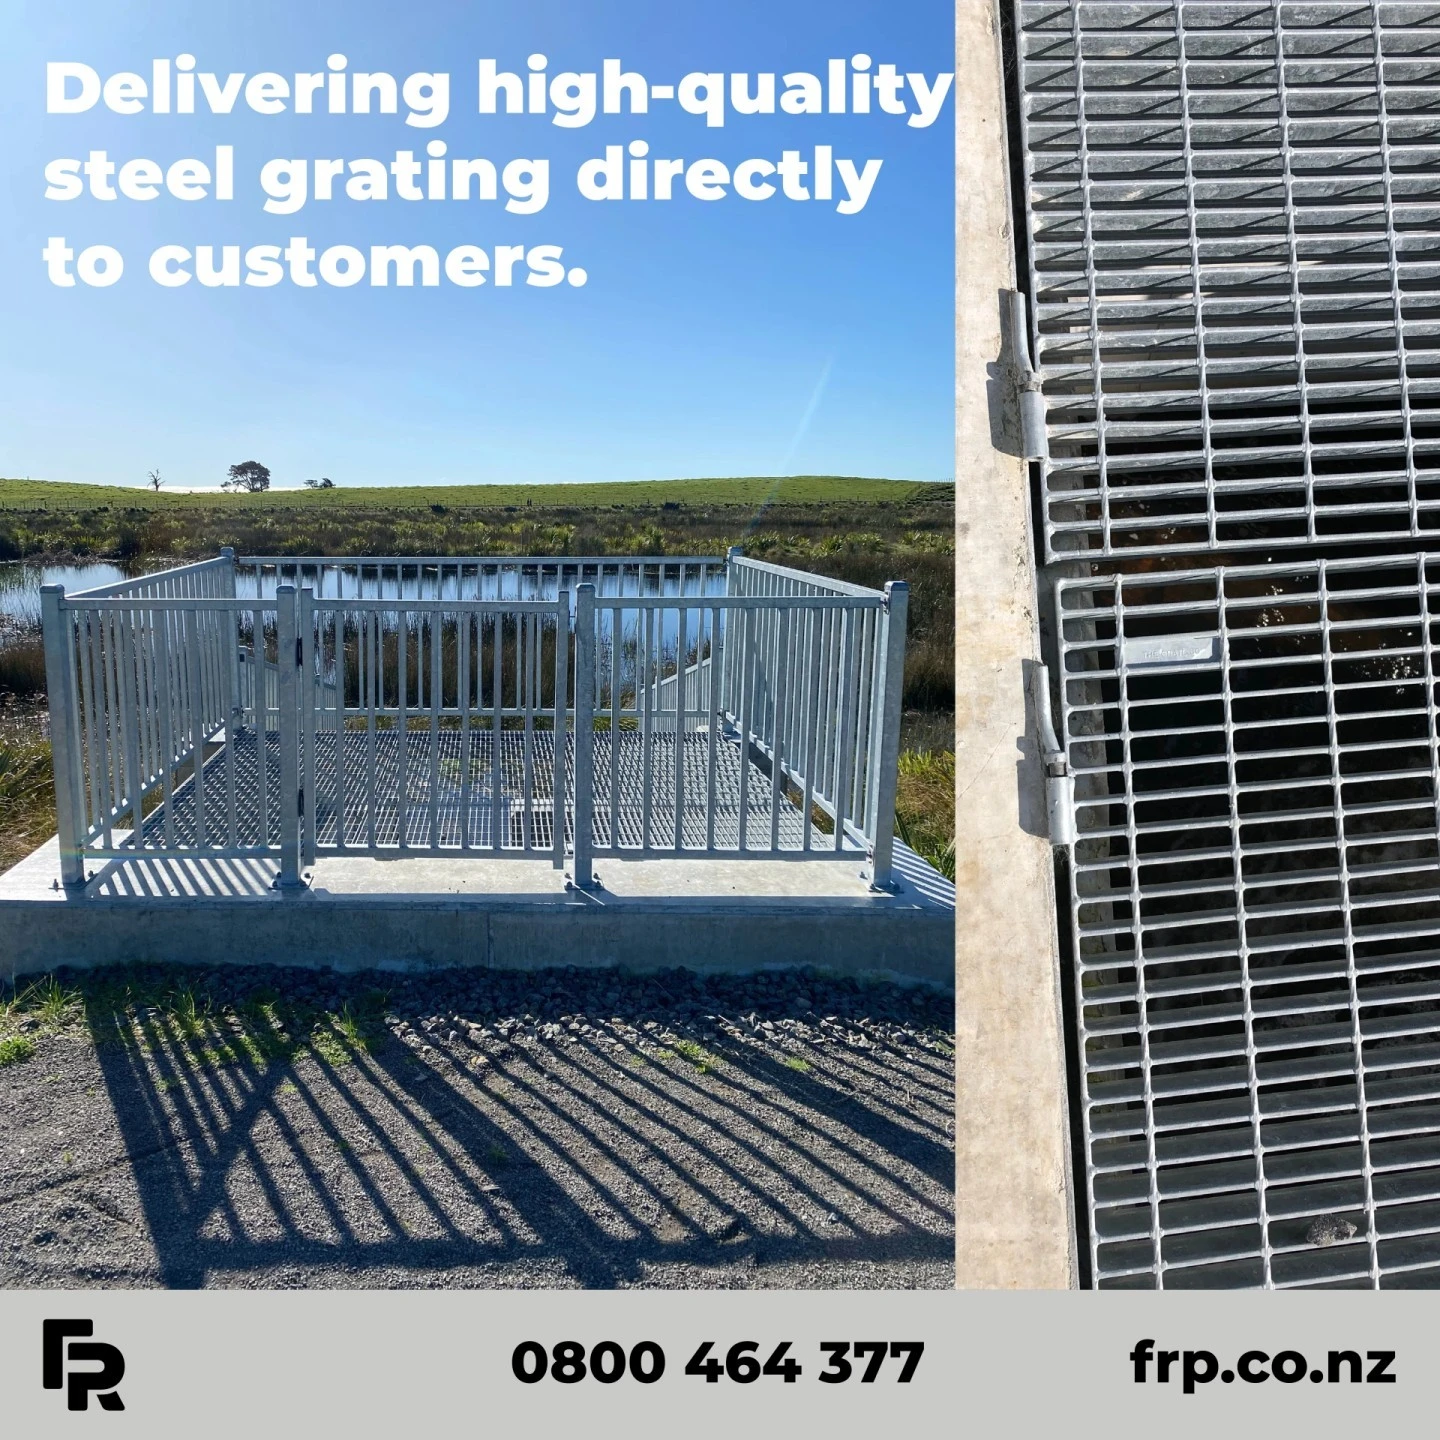 Enquire today; we have product in stock.

#frp #frpproducts #steel #steelgrating #industrial #commercial #nzarchitects #engineers #engineering